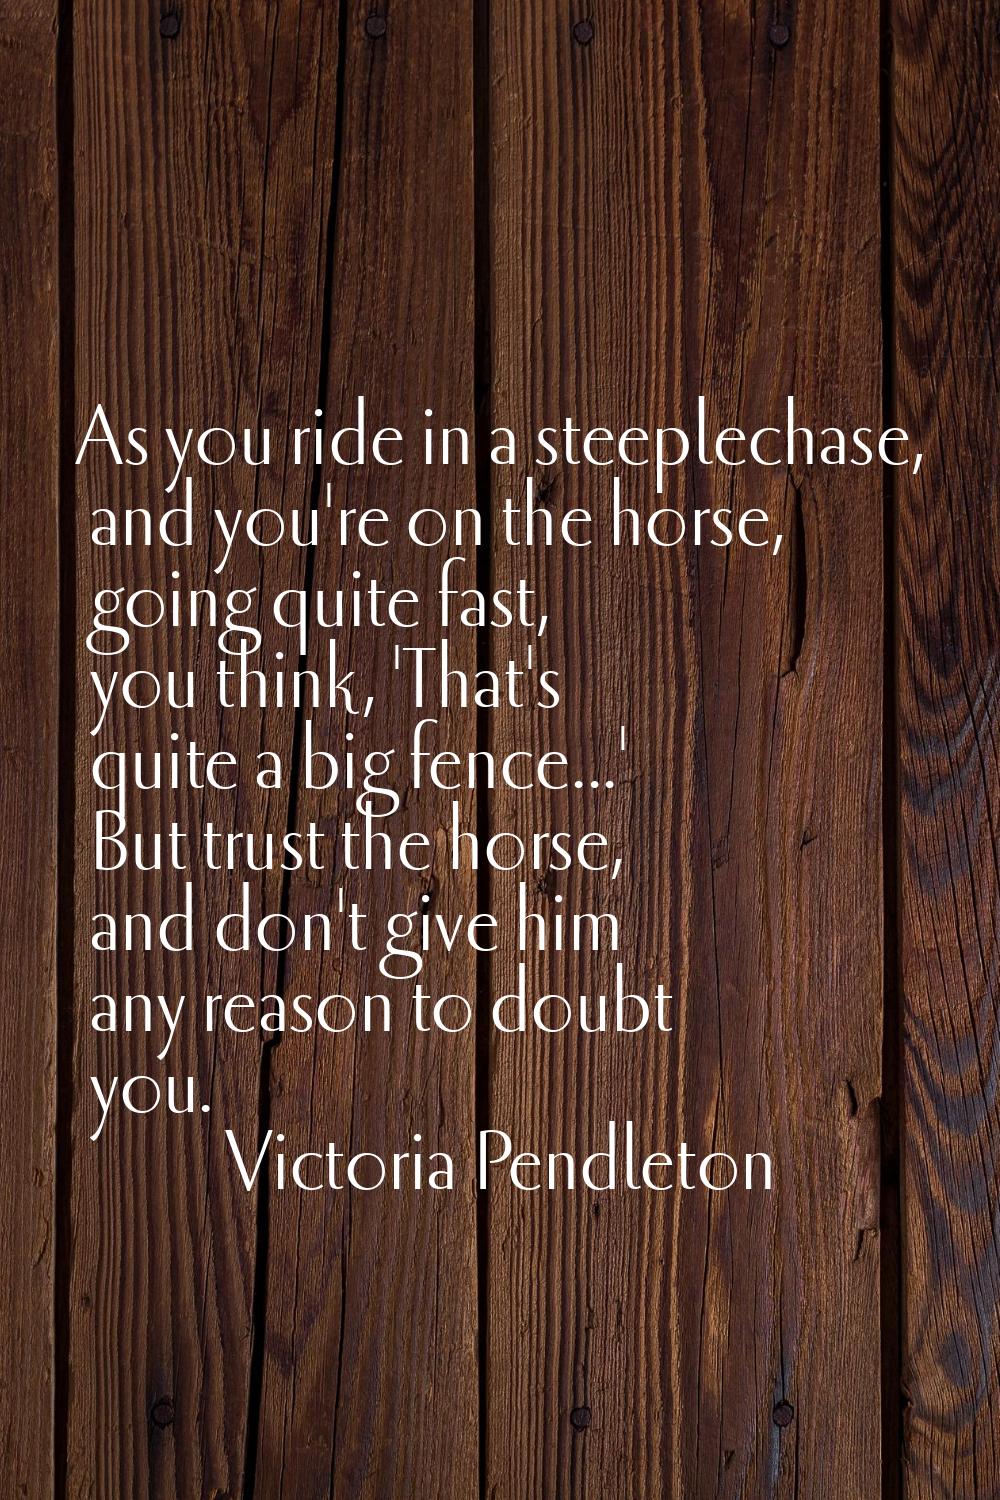 As you ride in a steeplechase, and you're on the horse, going quite fast, you think, 'That's quite 